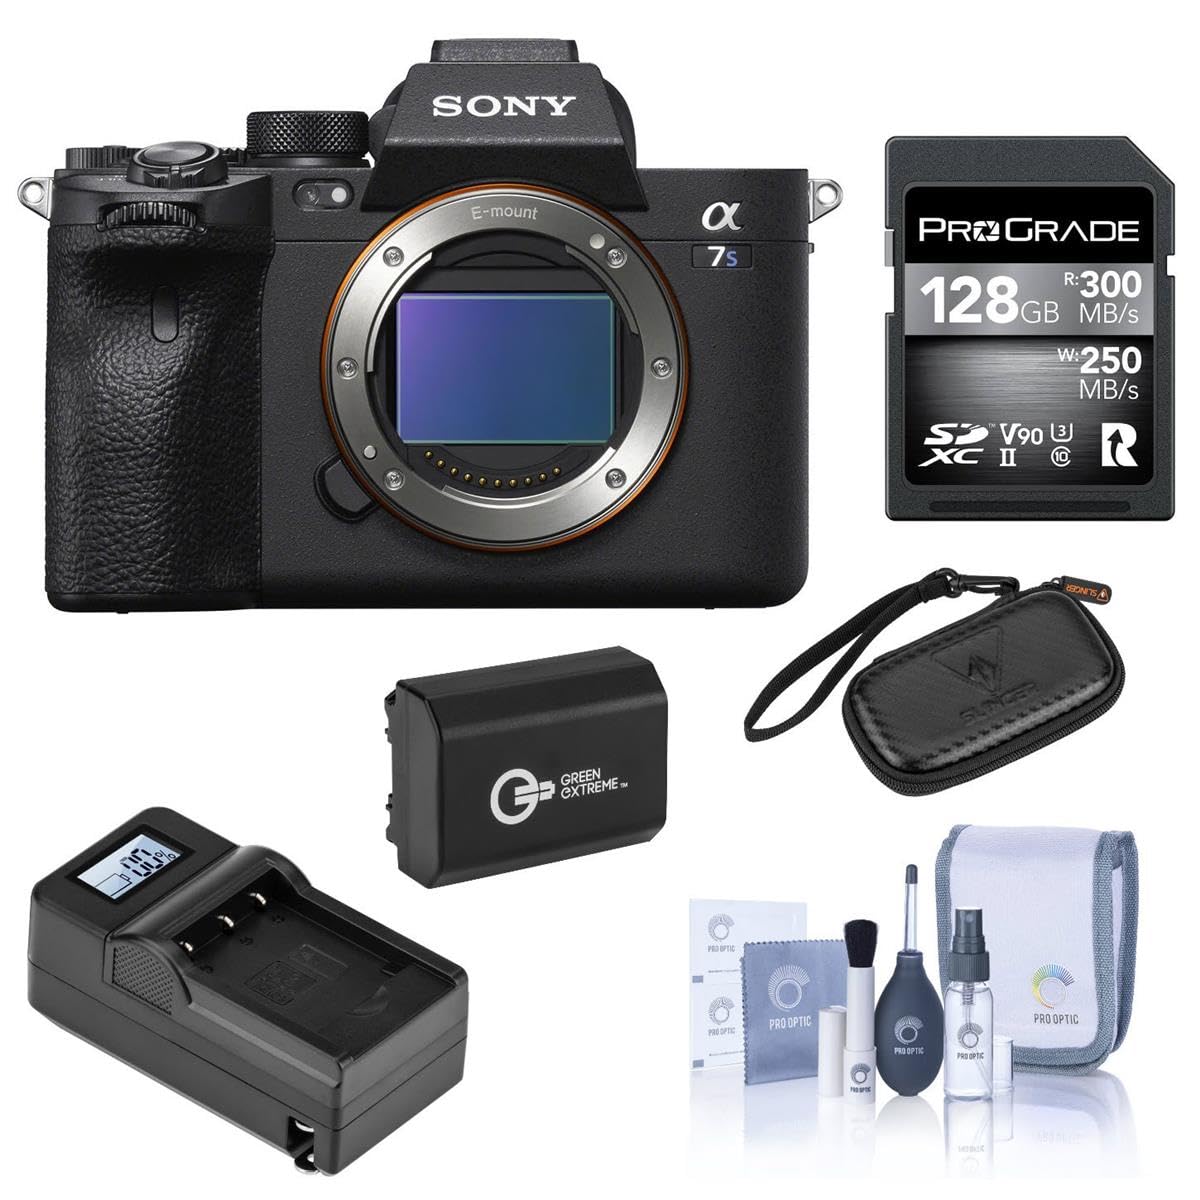 Sony Alpha a7S III Mirrorless Digital Camera Body Bundle with ProGrade 128GB UHS-II V90 SD Card, Extra Battery, Compact Charger, Memory Wallet, Cleaning Kit